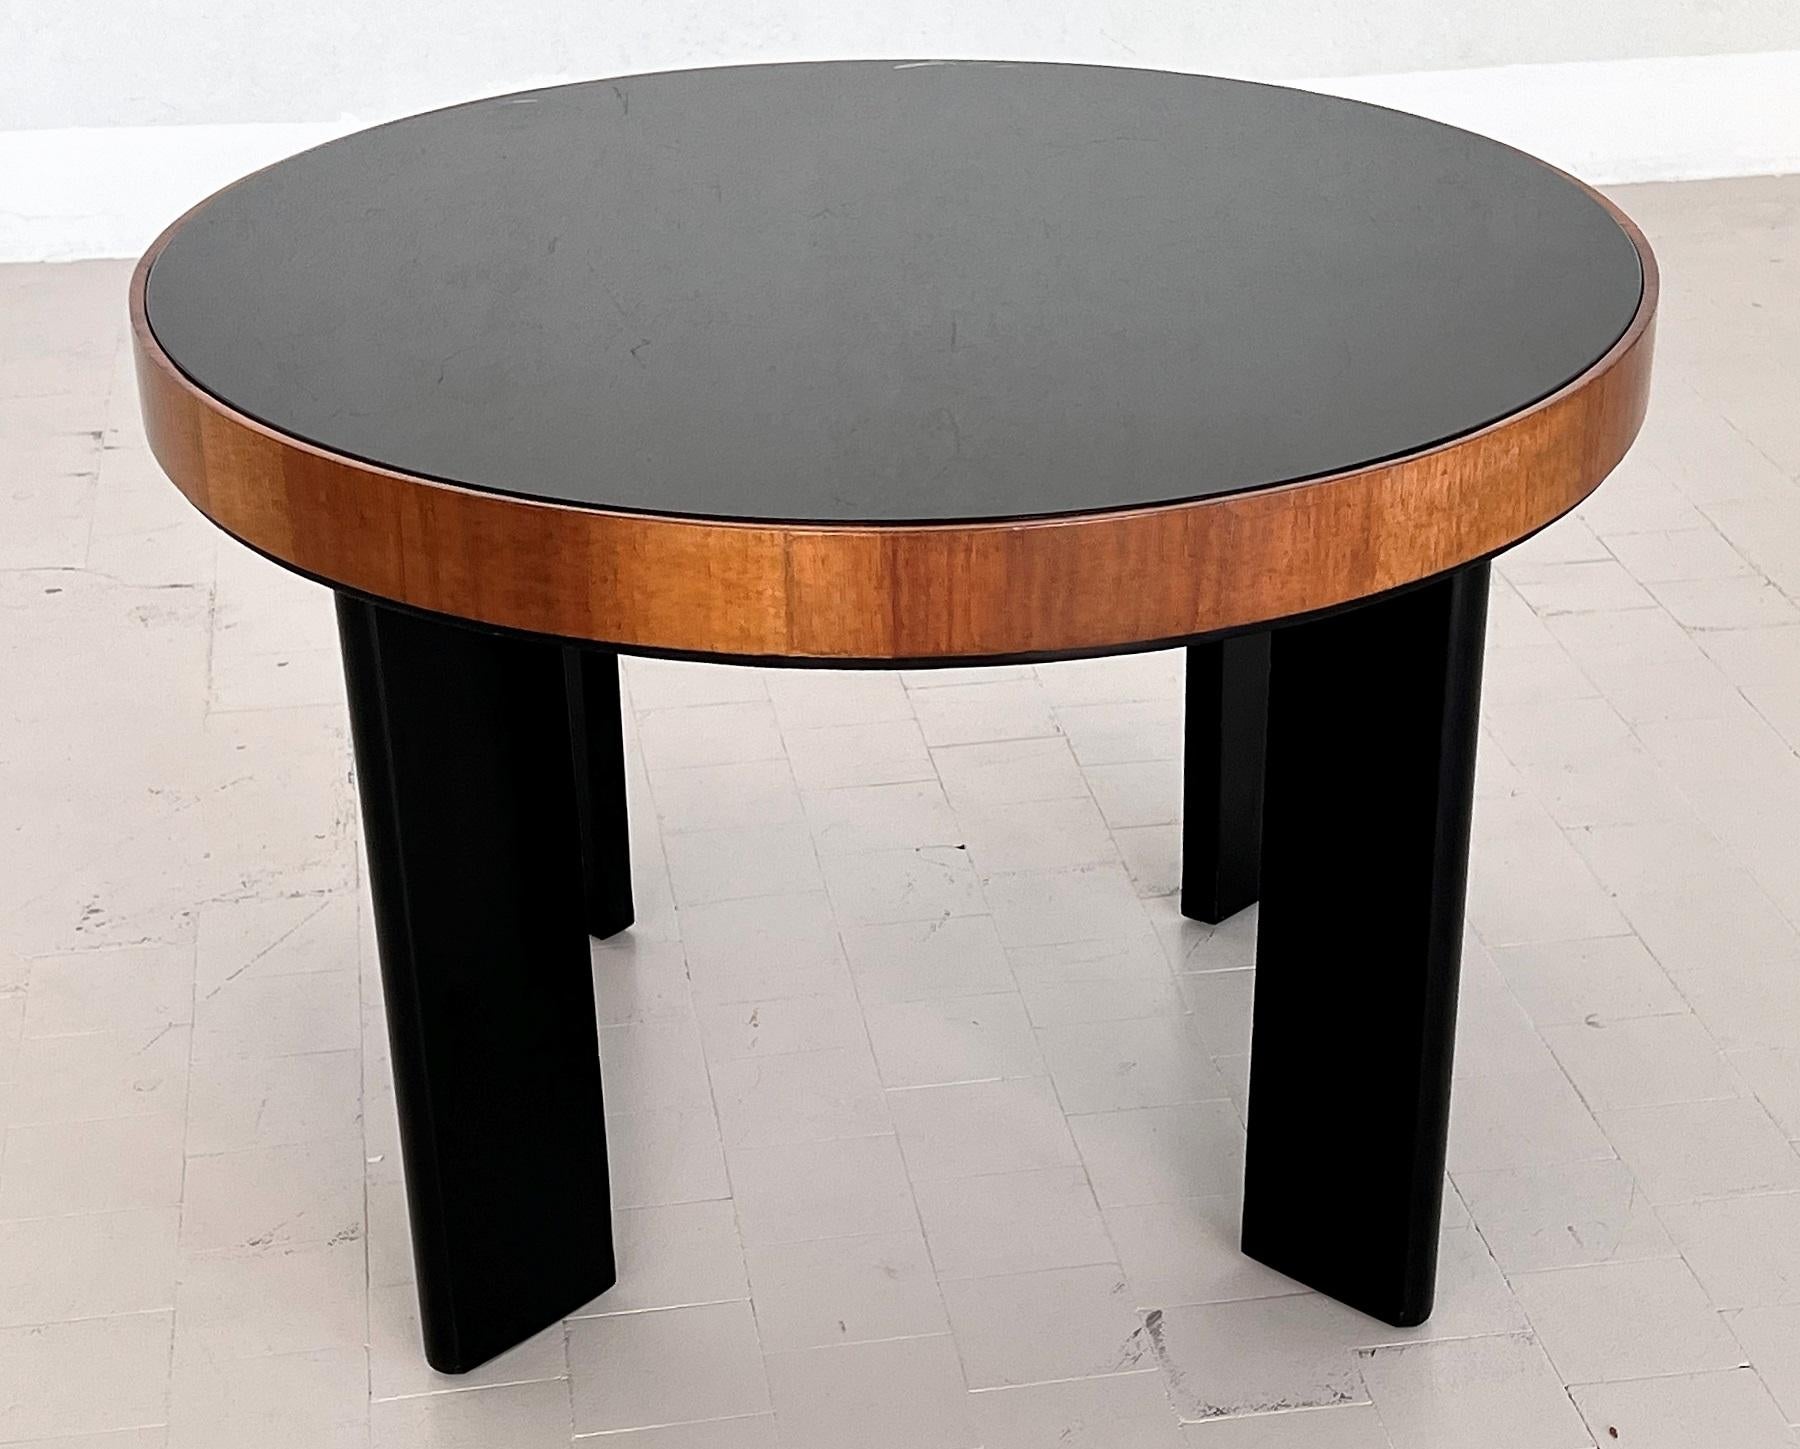 Italian Art Deco Style Coffee Table in Wood with Glass Top, 1970s For Sale 1